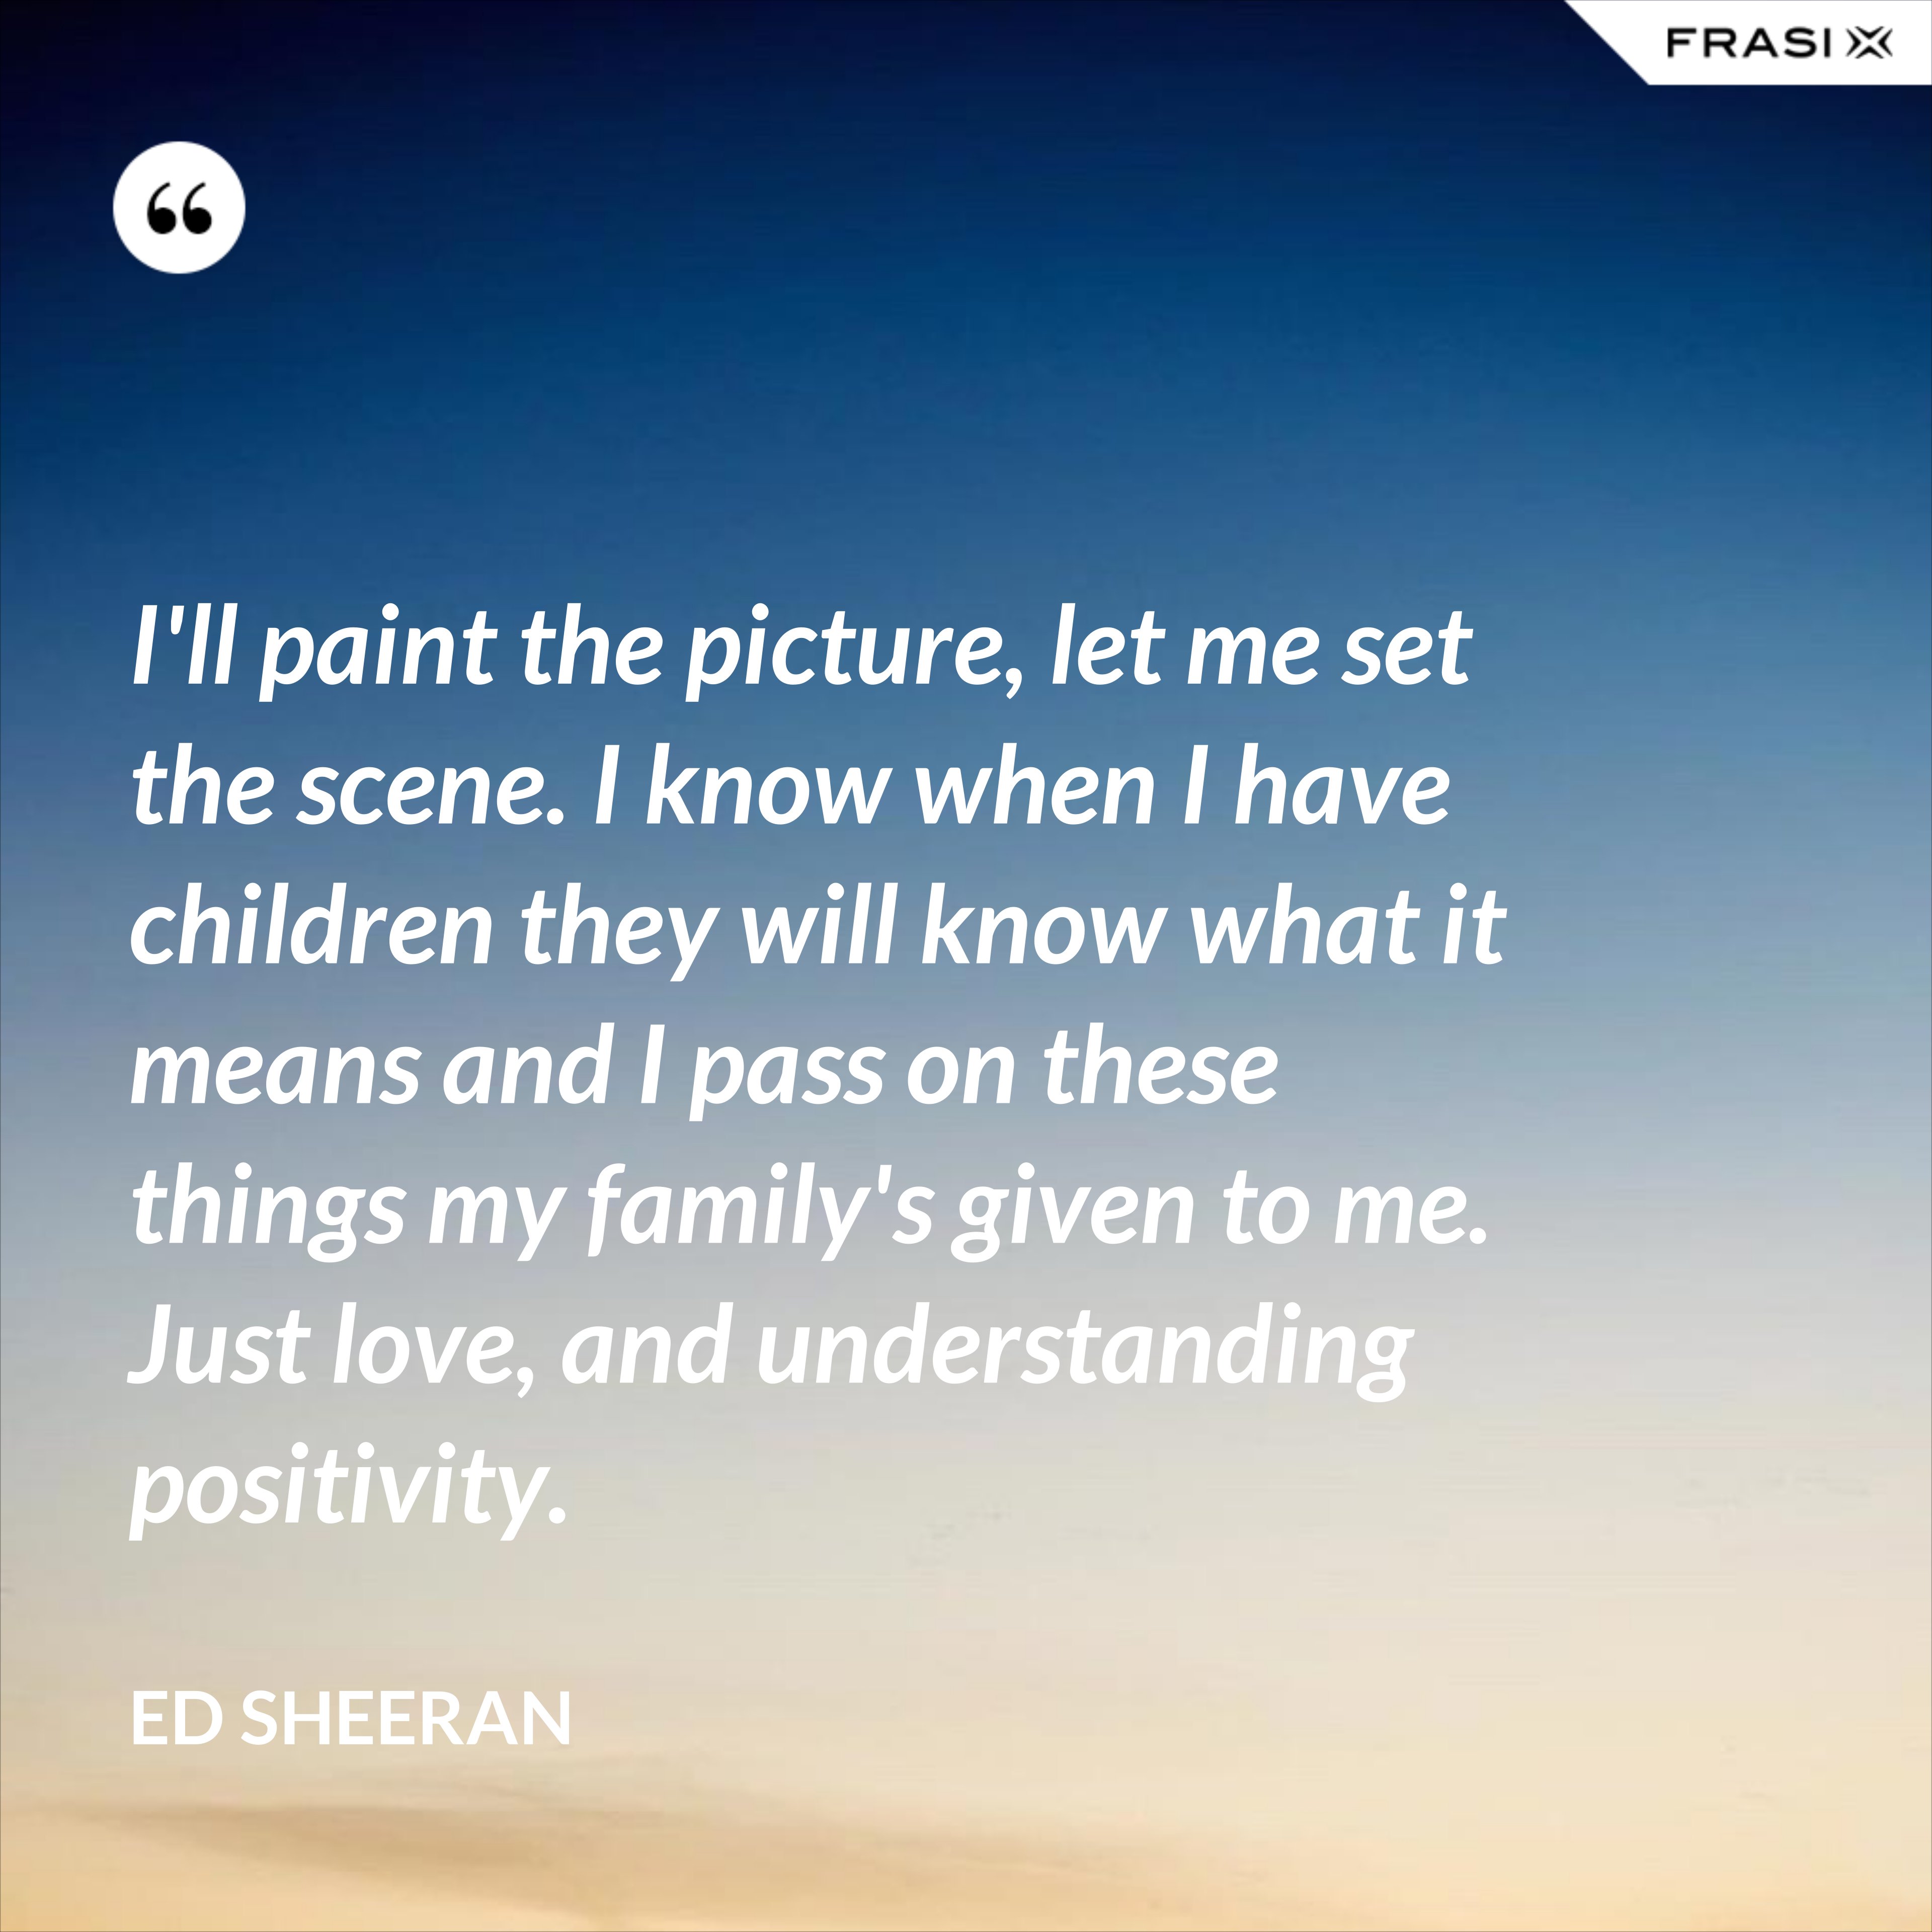 I'll paint the picture, let me set the scene. I know when I have children they will know what it means and I pass on these things my family's given to me. Just love, and understanding positivity. - Ed Sheeran